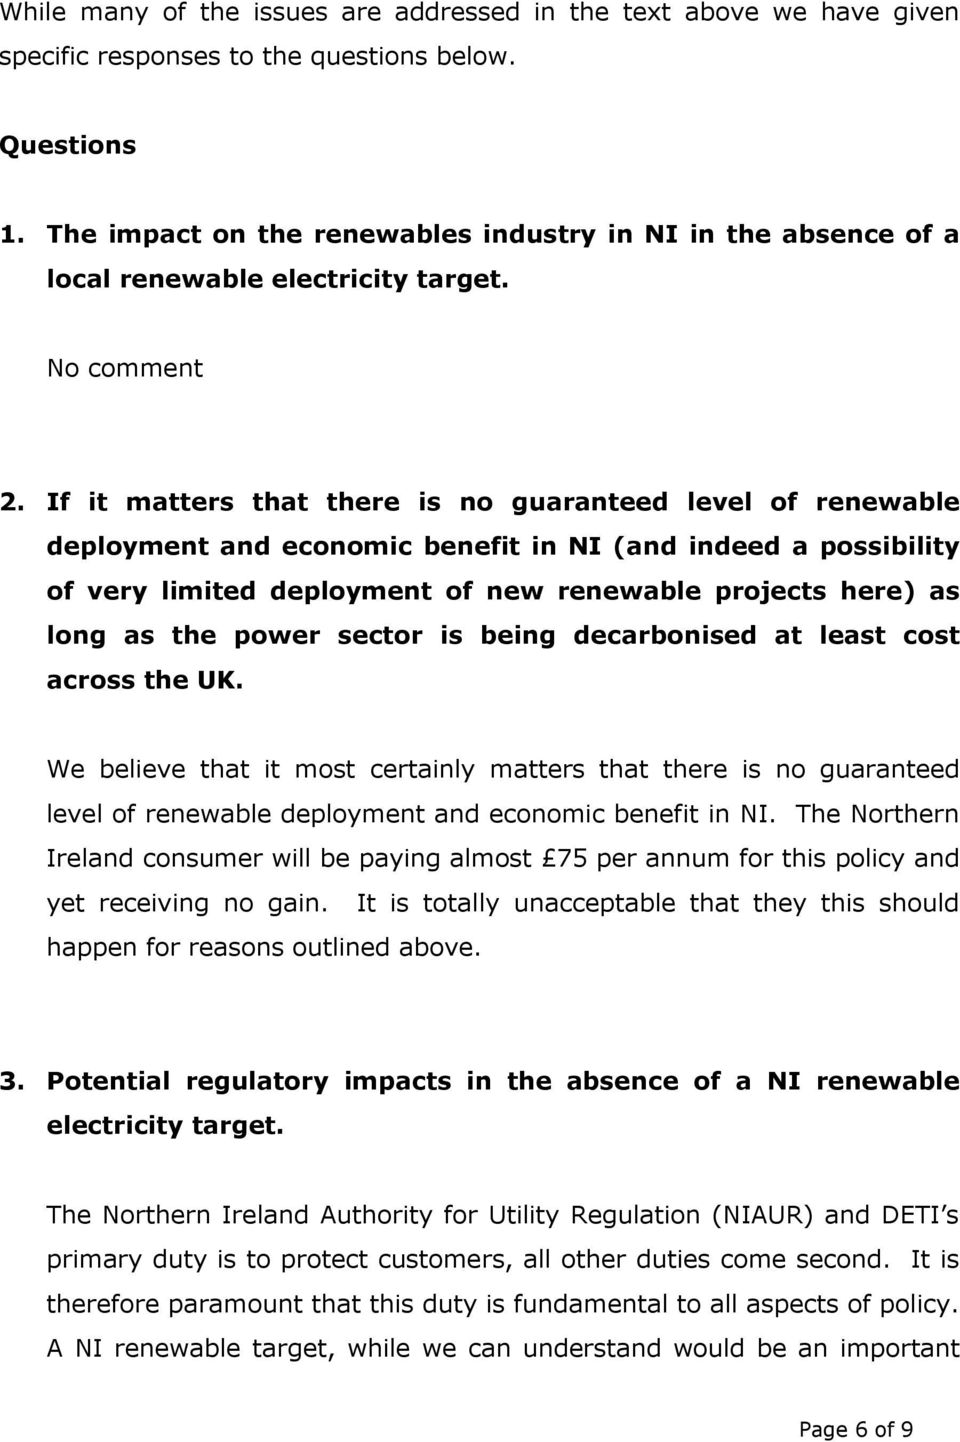 If it matters that there is no guaranteed level of renewable deployment and economic benefit in NI (and indeed a possibility of very limited deployment of new renewable projects here) as long as the